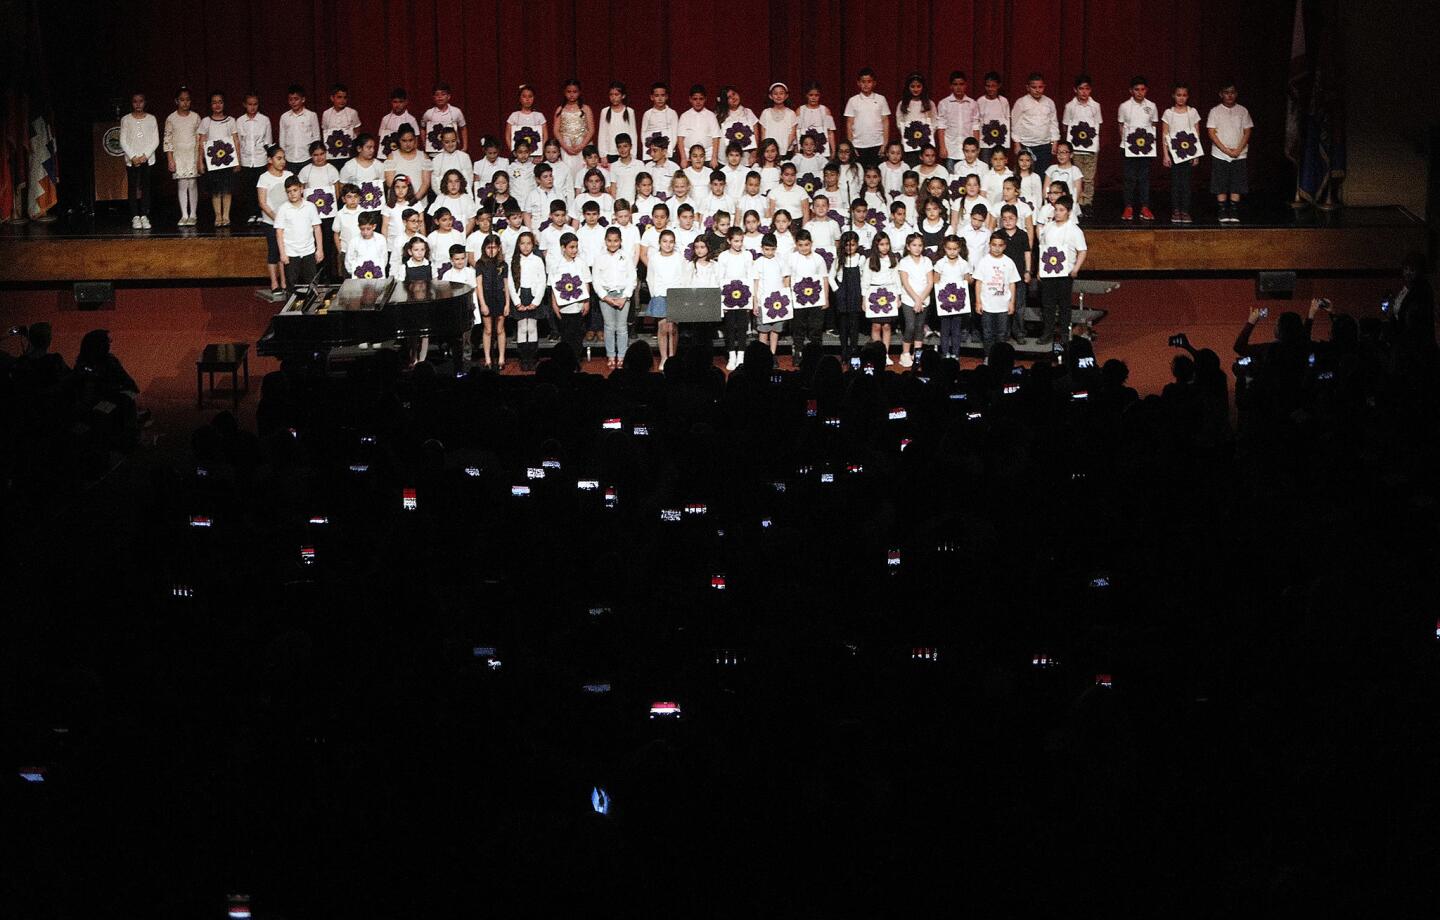 One-hundred-two elementary school students from R.D. White and Jefferson take the stage to perform "April Khagagh" and "Eye of the Tiger" in the 18th annual Armenian Genocide Commemoration in the John Wayne Performing Arts Center at Glendale High School on Wednesday, April 17, 2019. Performances by students at Glendale Unified School District schools performed, from elementary to high school.